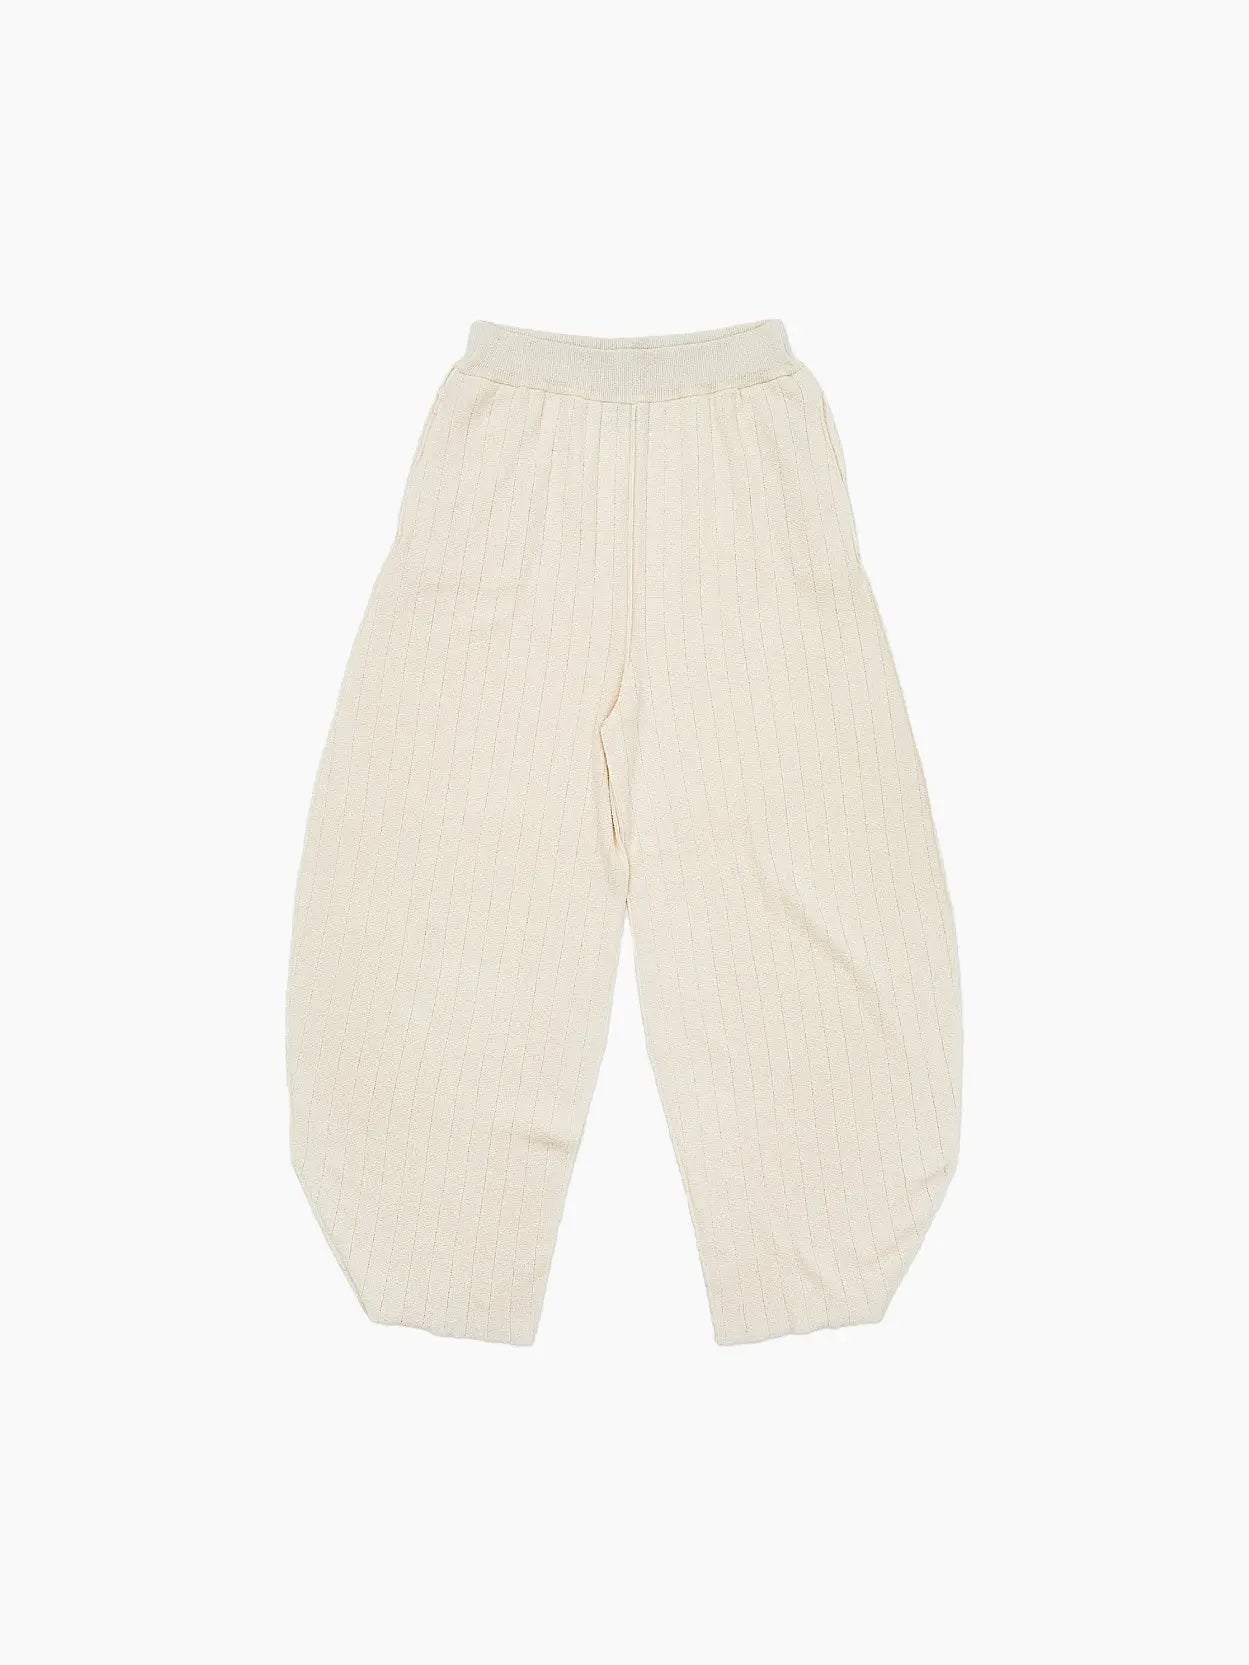 An image of a pair of Ohirune Pants Chalk from Rus. The pants feature an elastic waistband and a relaxed fit, lying flat on a plain white background.